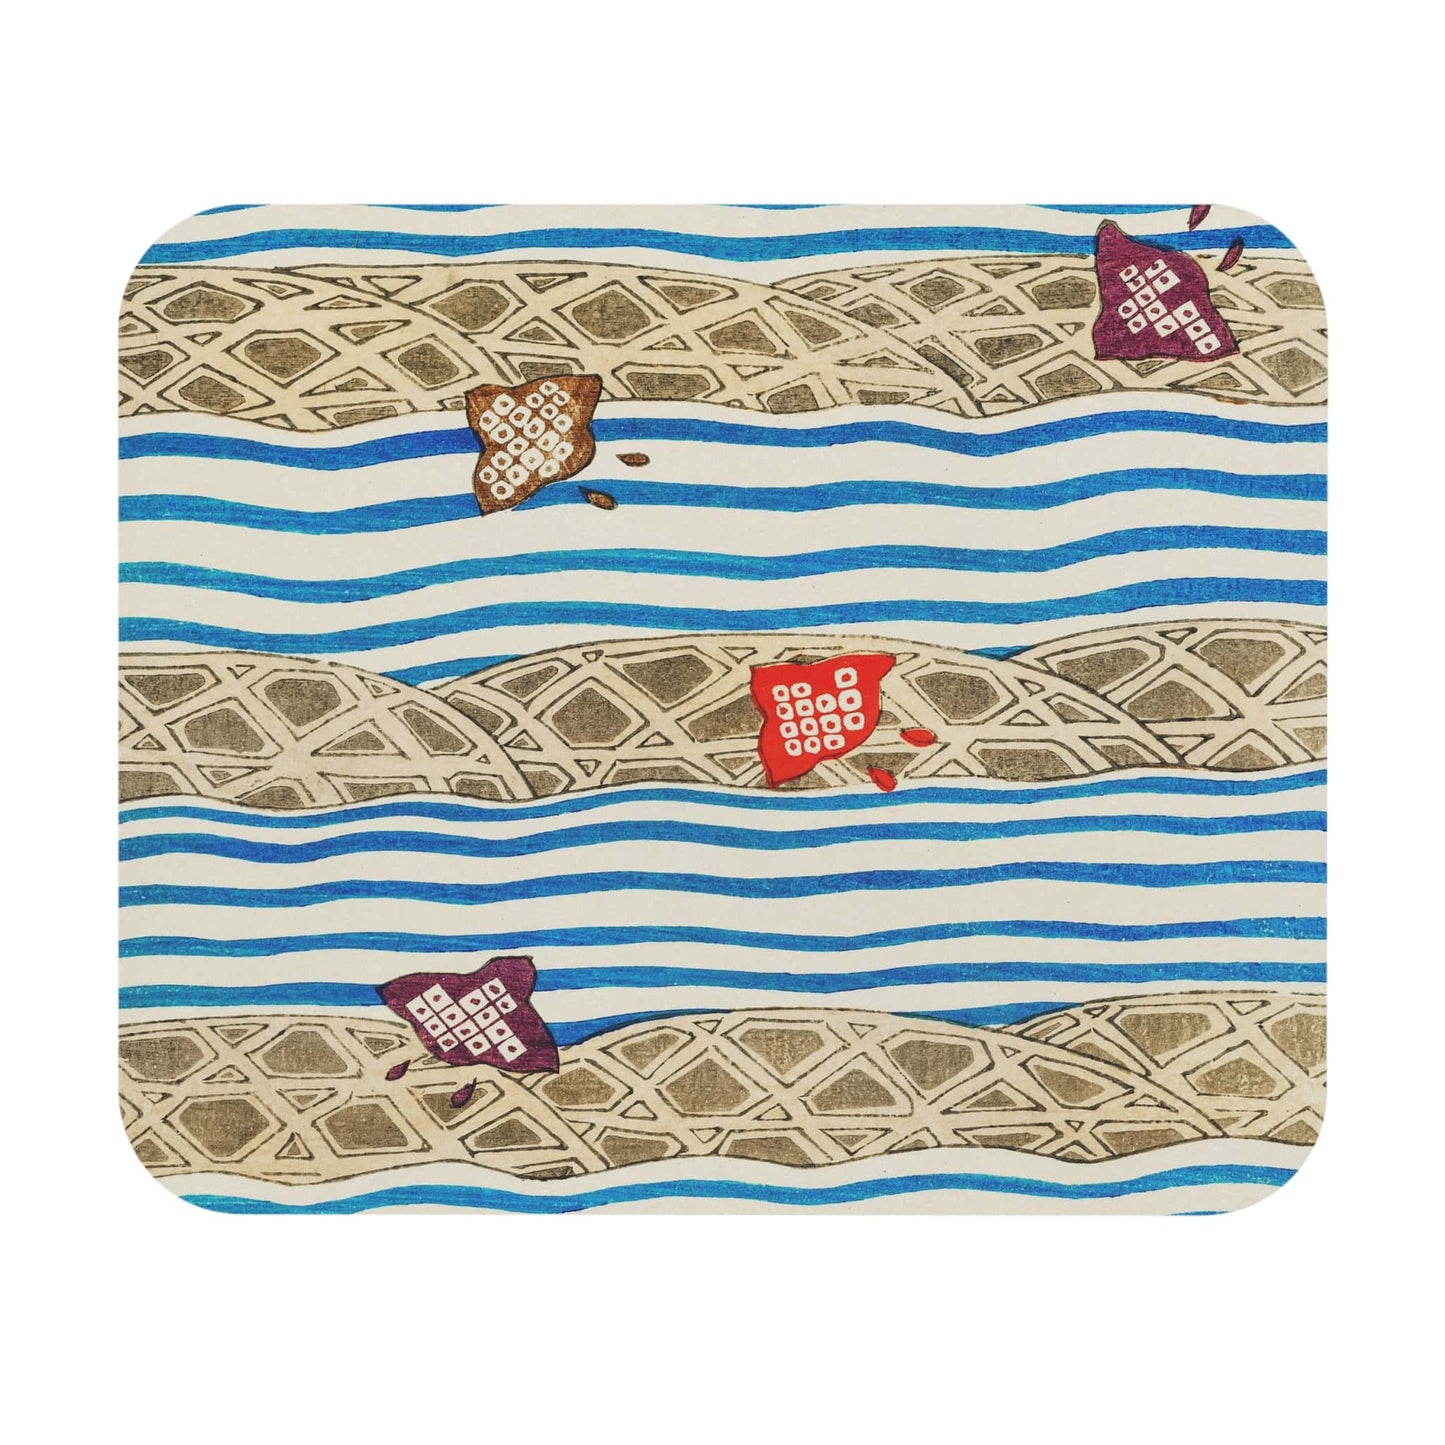 Little Japanese Kites Mouse Pad with playful blue wavy pattern, desk and office decor featuring whimsical kite designs.